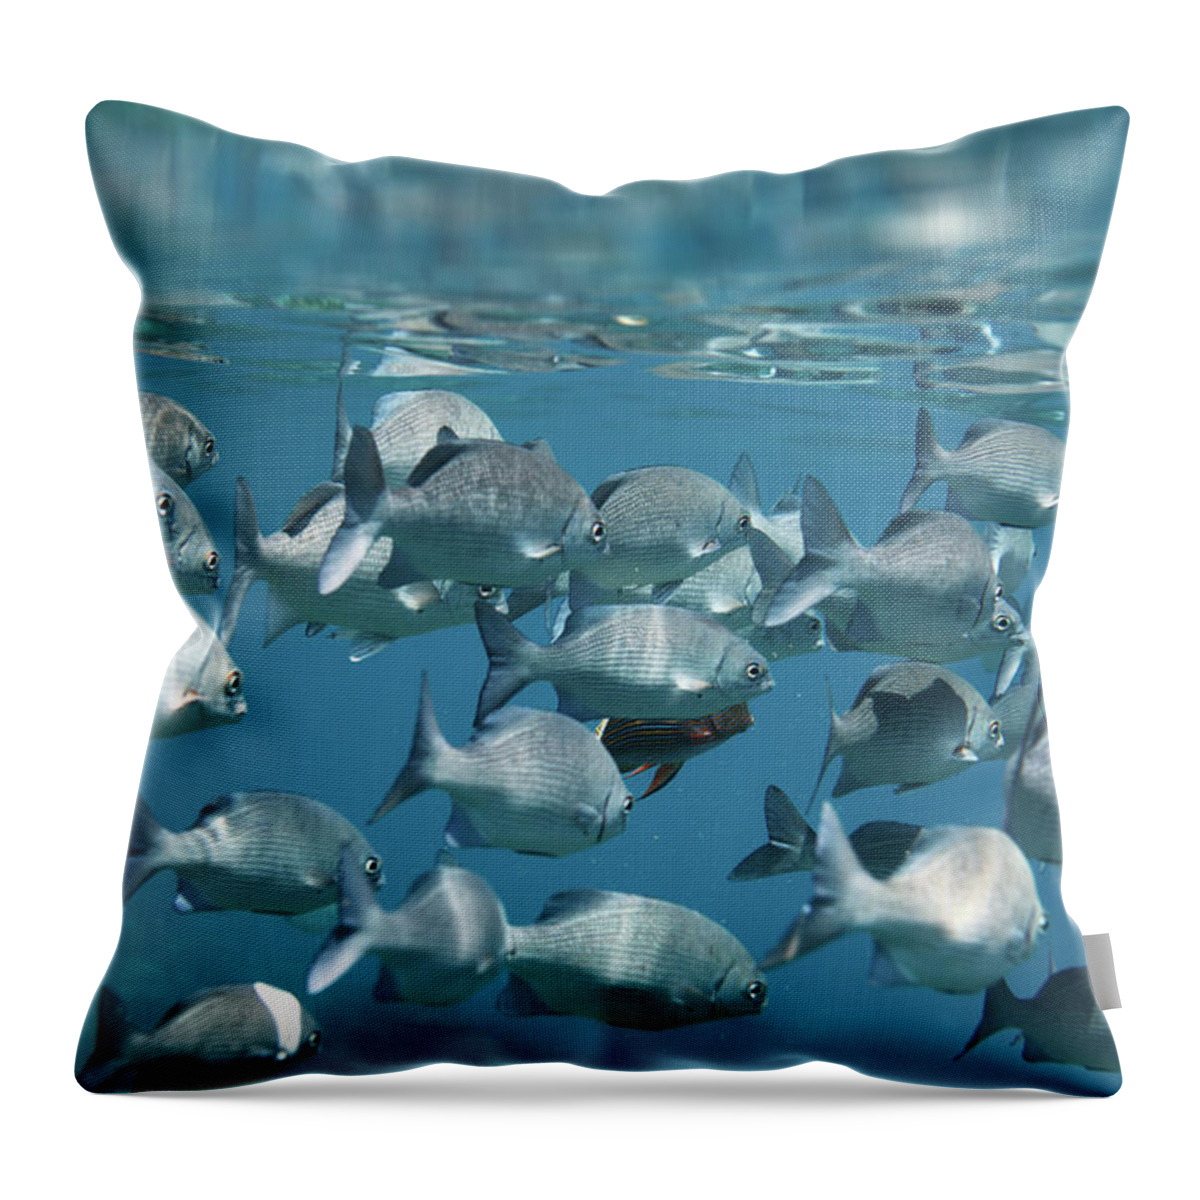 Underwater Throw Pillow featuring the photograph School Of Fish #1 by Danilovi